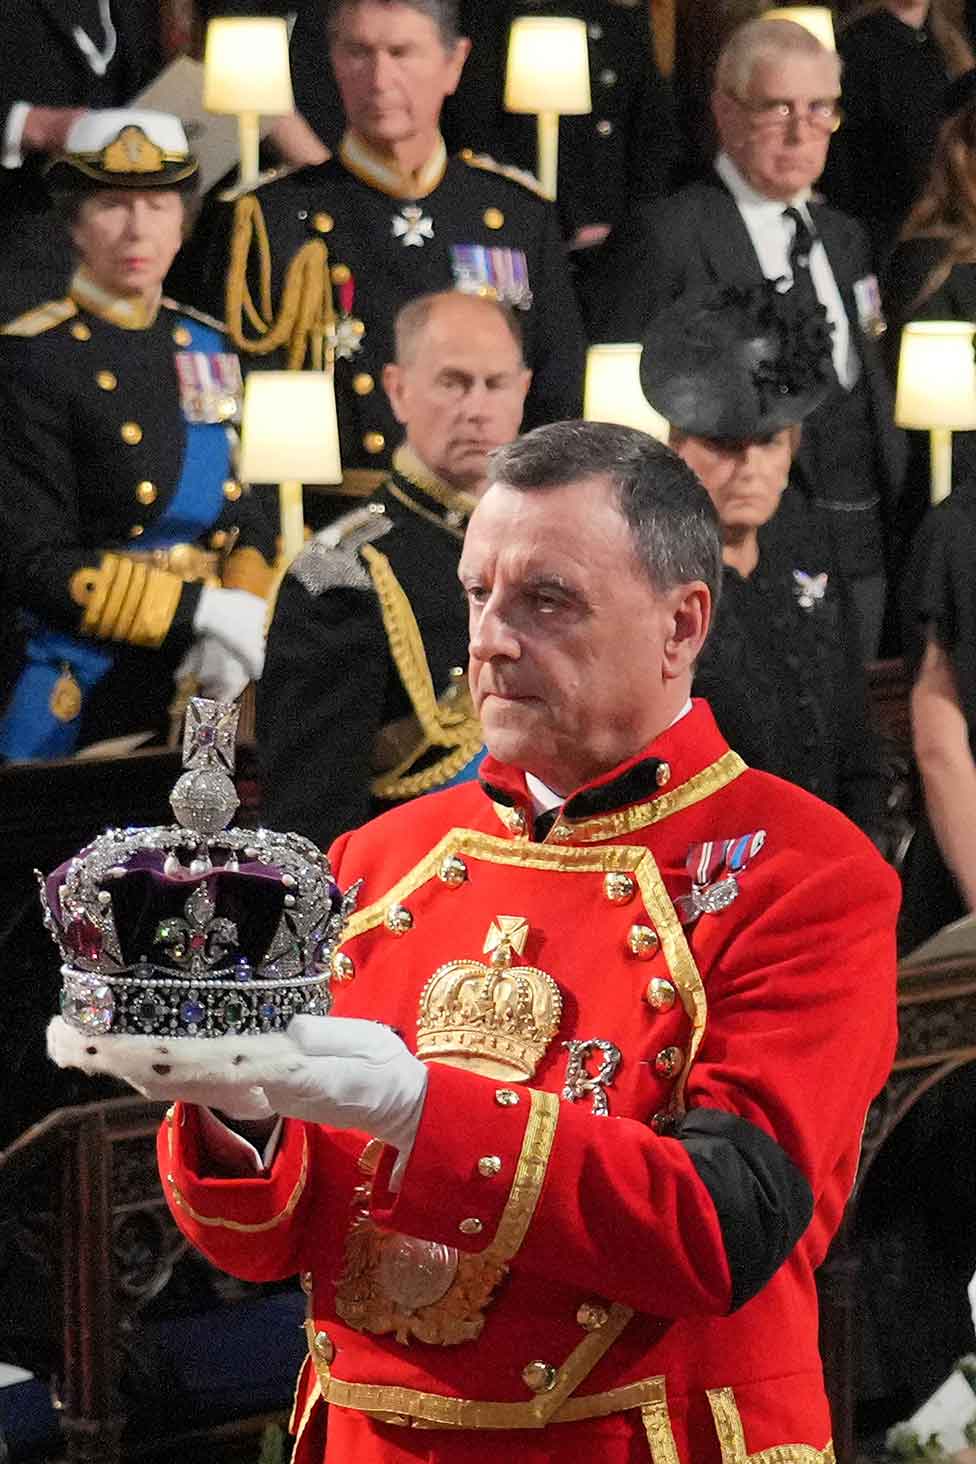 The Imperial State Crown is removed from the coffin at the Committal Service